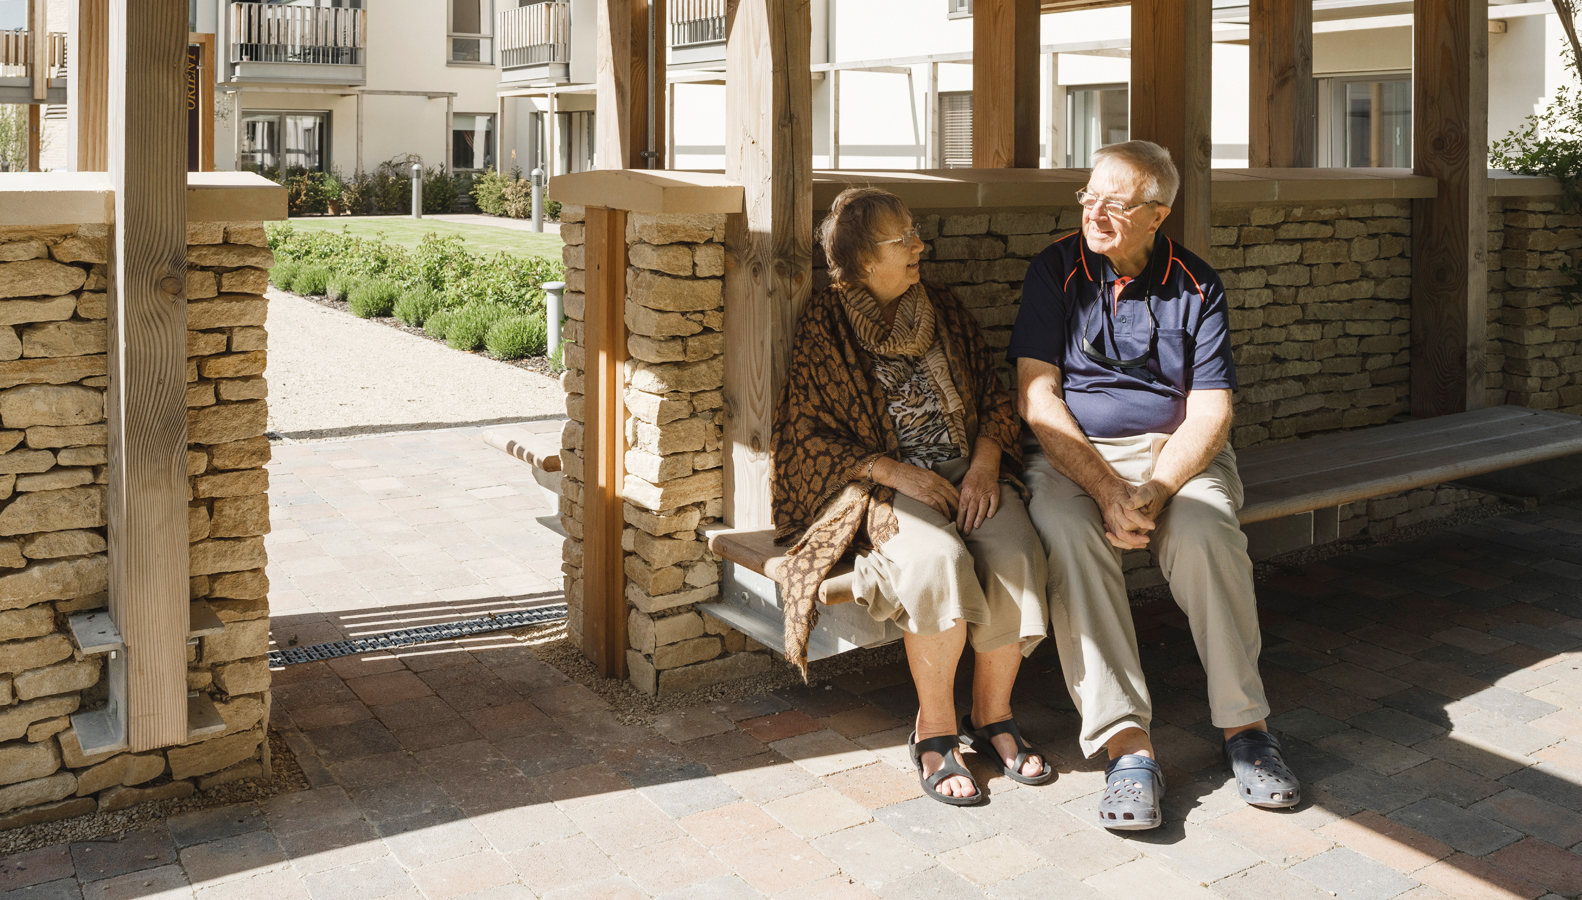 How do we design housing for an ageing population? 